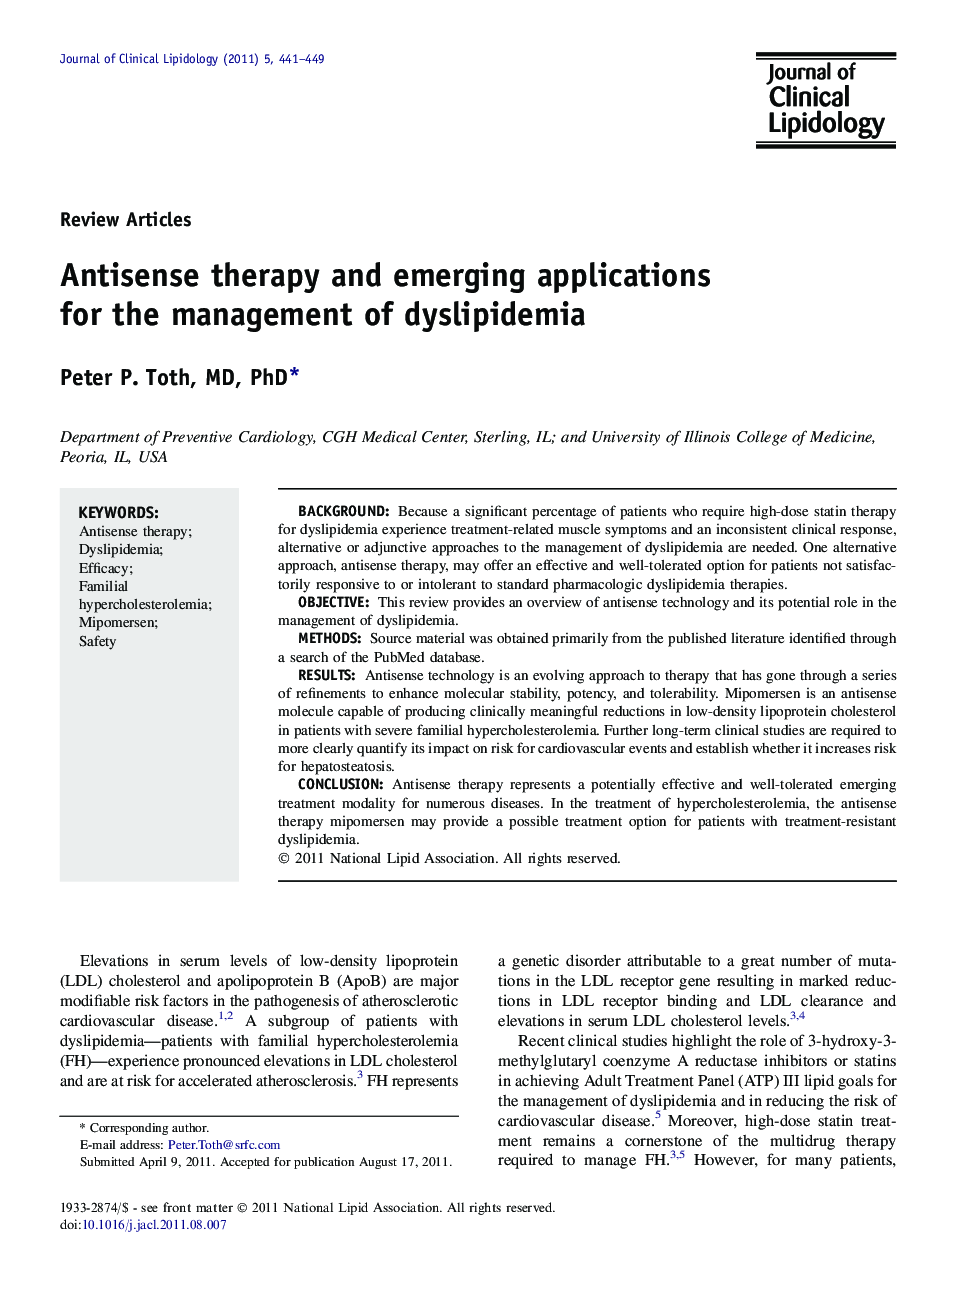 Antisense therapy and emerging applications for the management of dyslipidemia